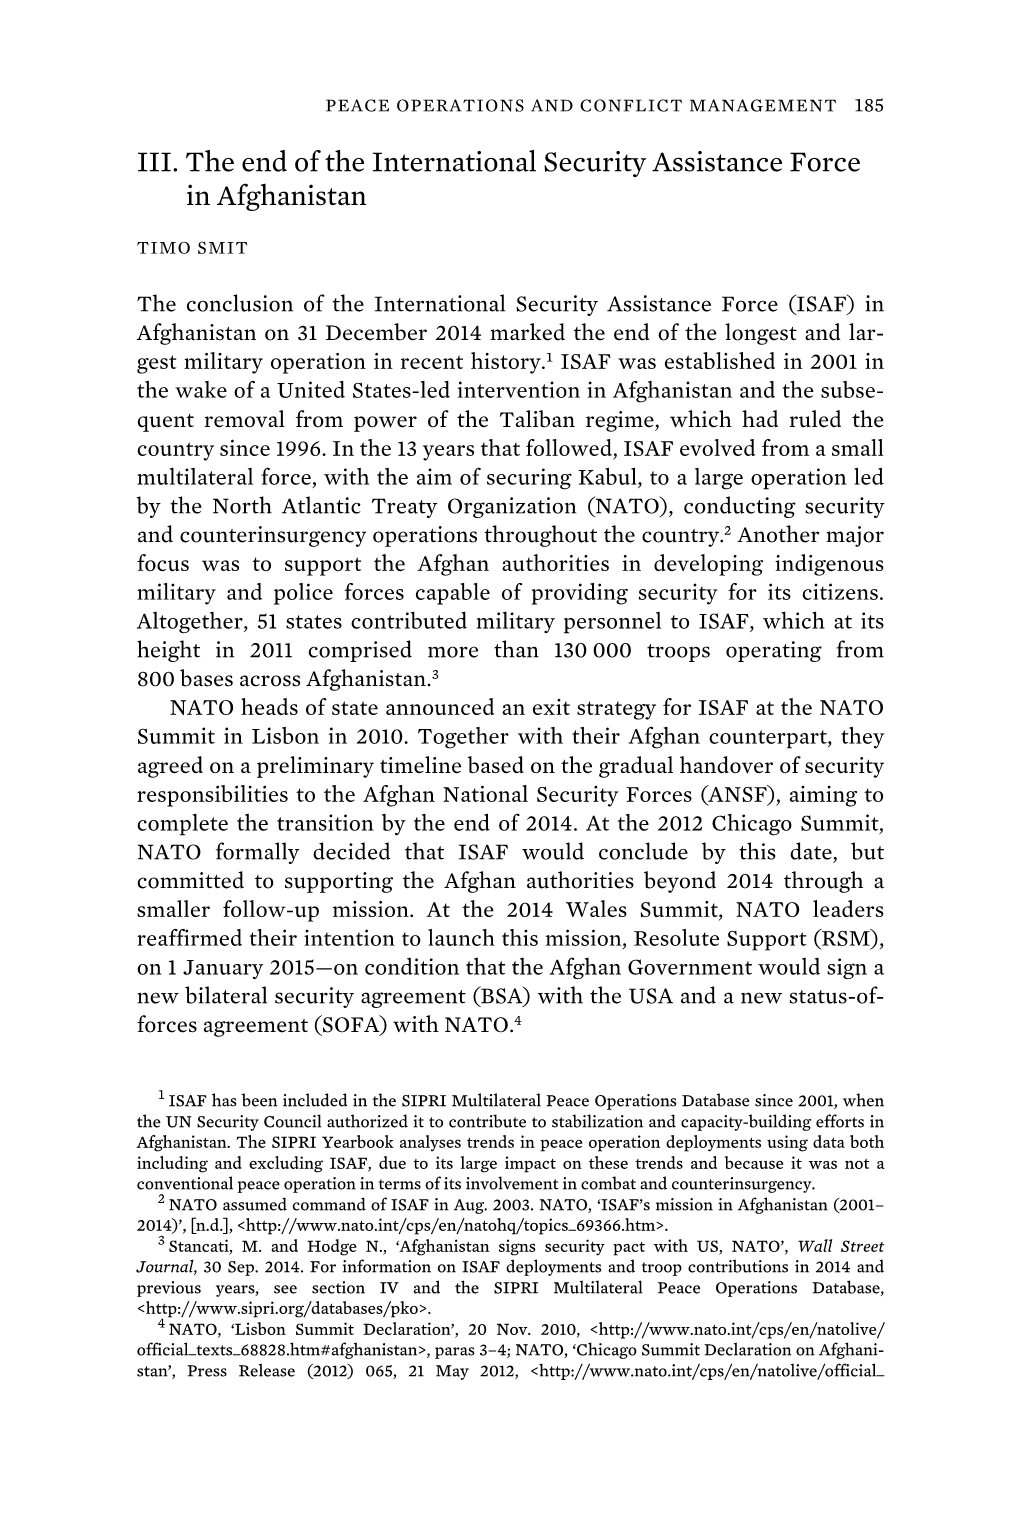 SIPRI Yearbook 2015 Chapter 5